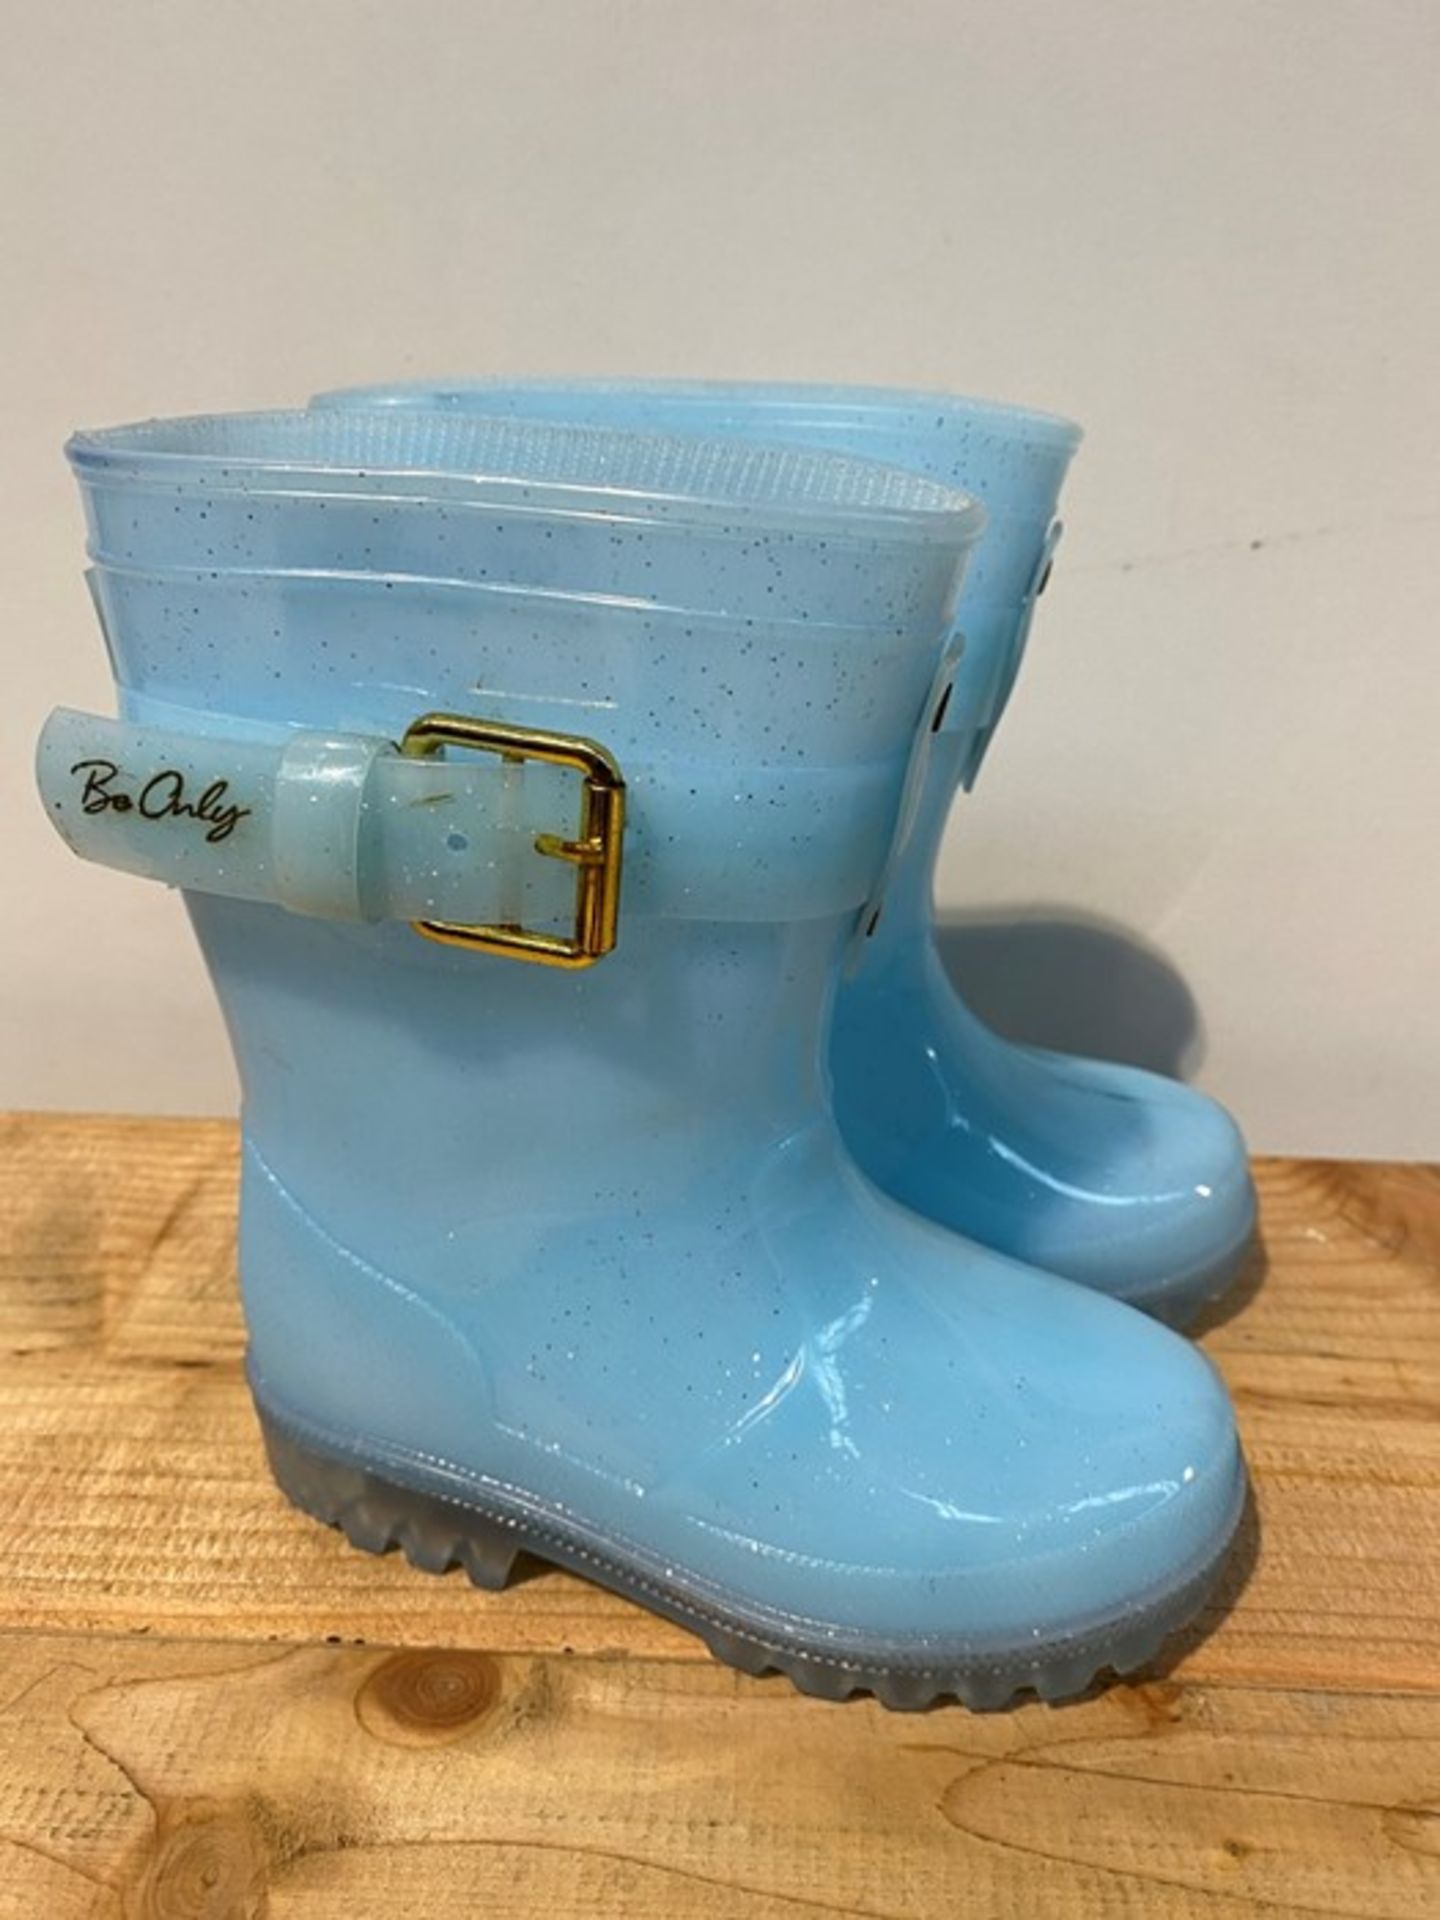 1 PAIR OF INFANT BE ONLY DOLCE FLASH LIGHT UP WELLINGTON BOOTS IN TURQUOISE BLUE / SIZE: 7 / RRP £